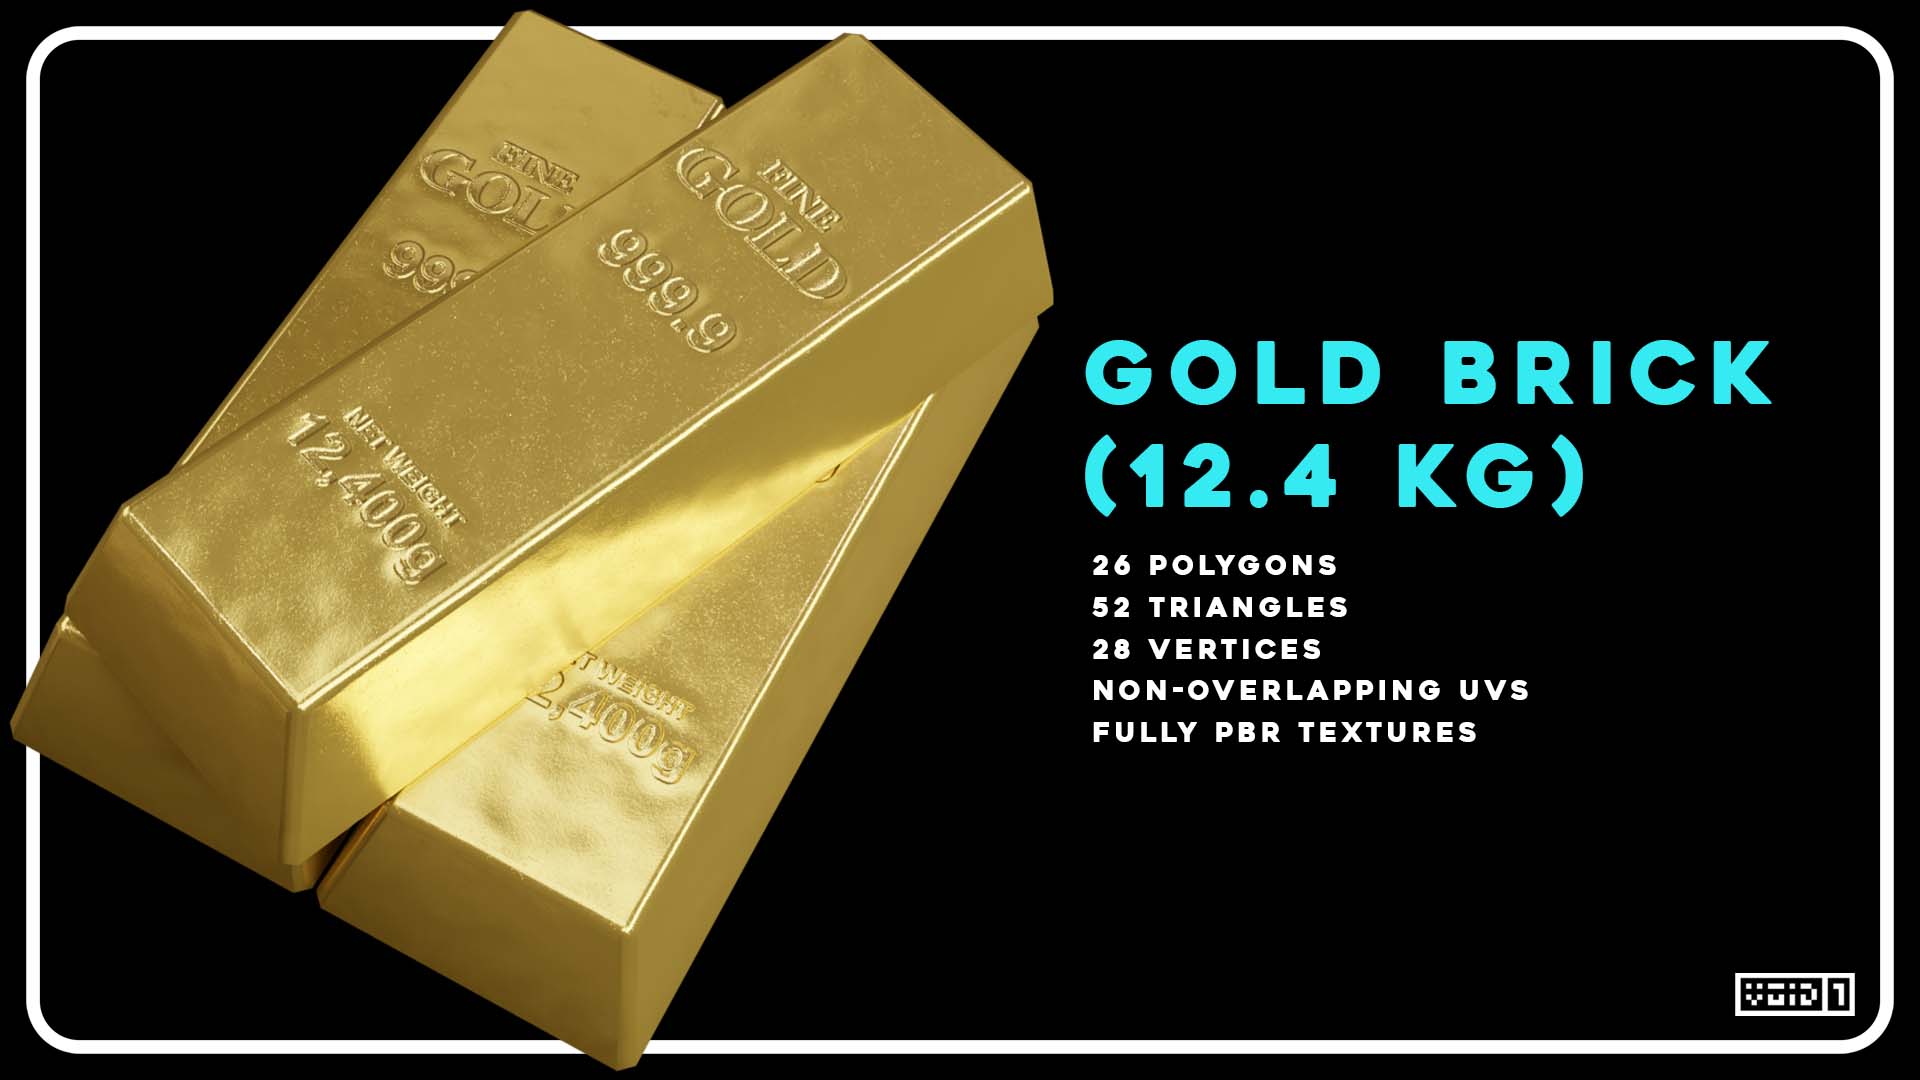 How to make convincing fake-gold bars